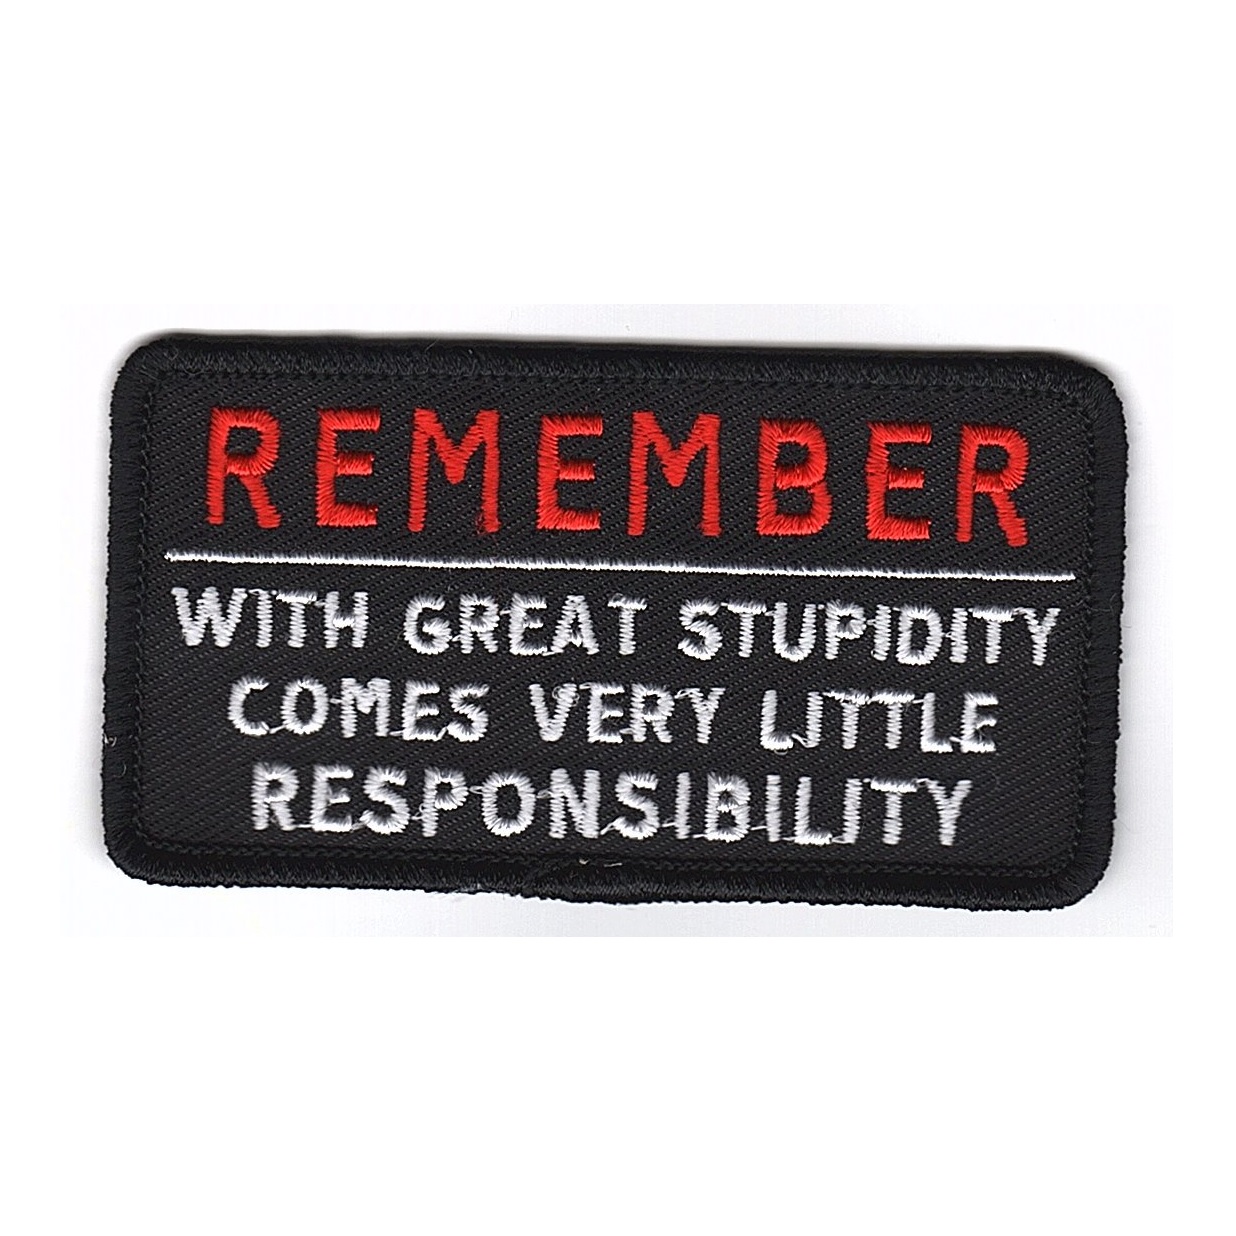 With great stupidity comes very little responsibility